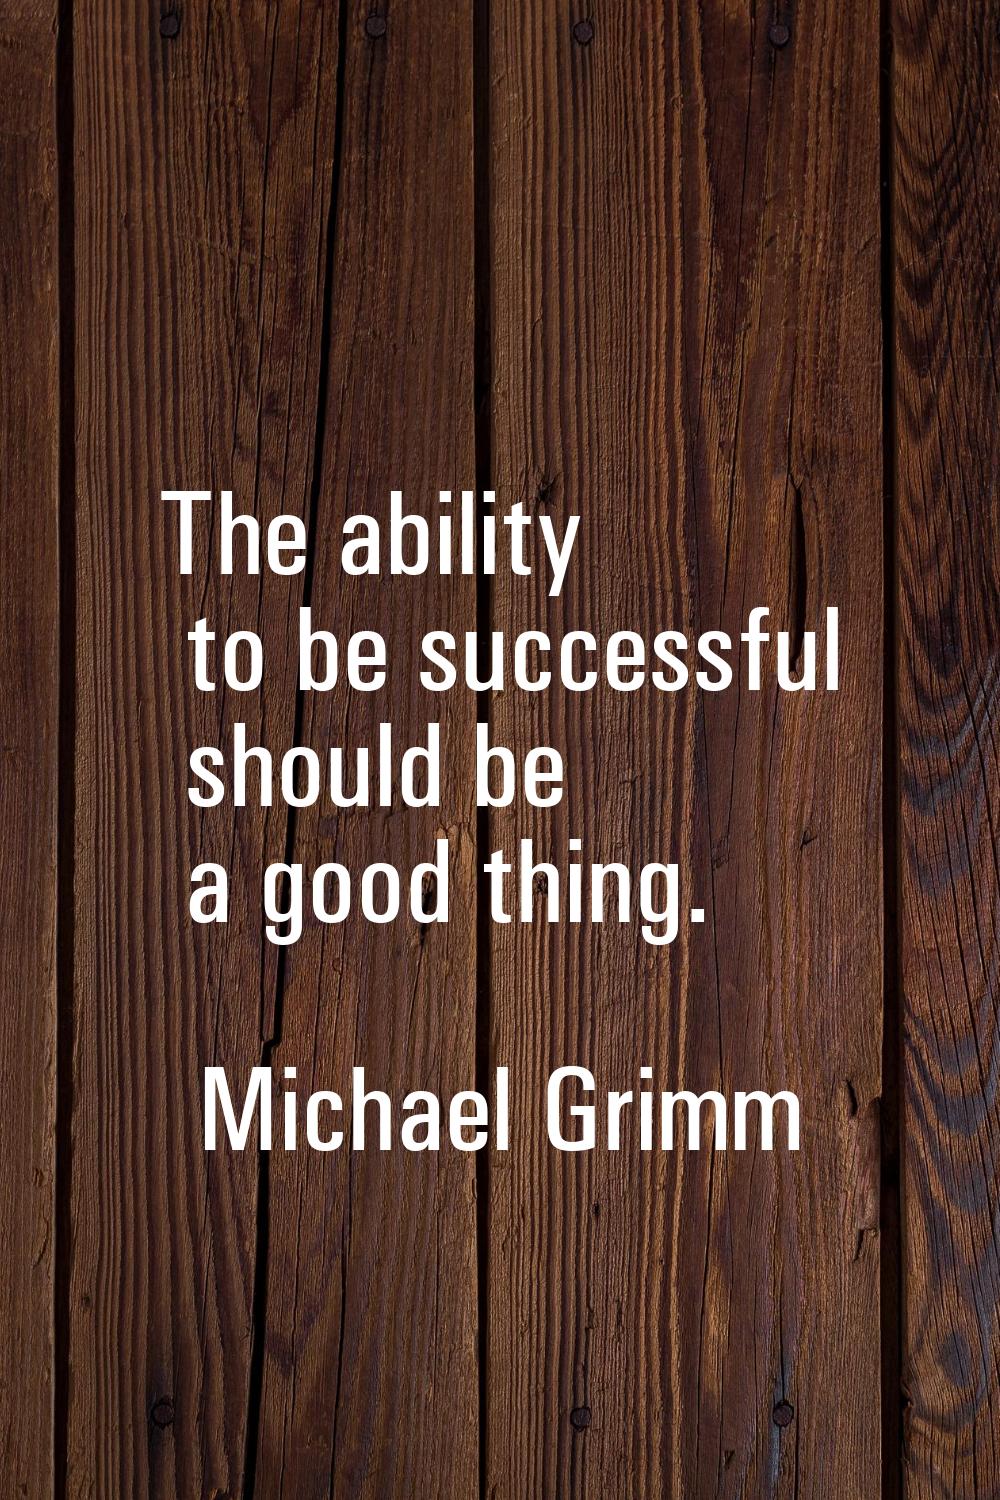 The ability to be successful should be a good thing.